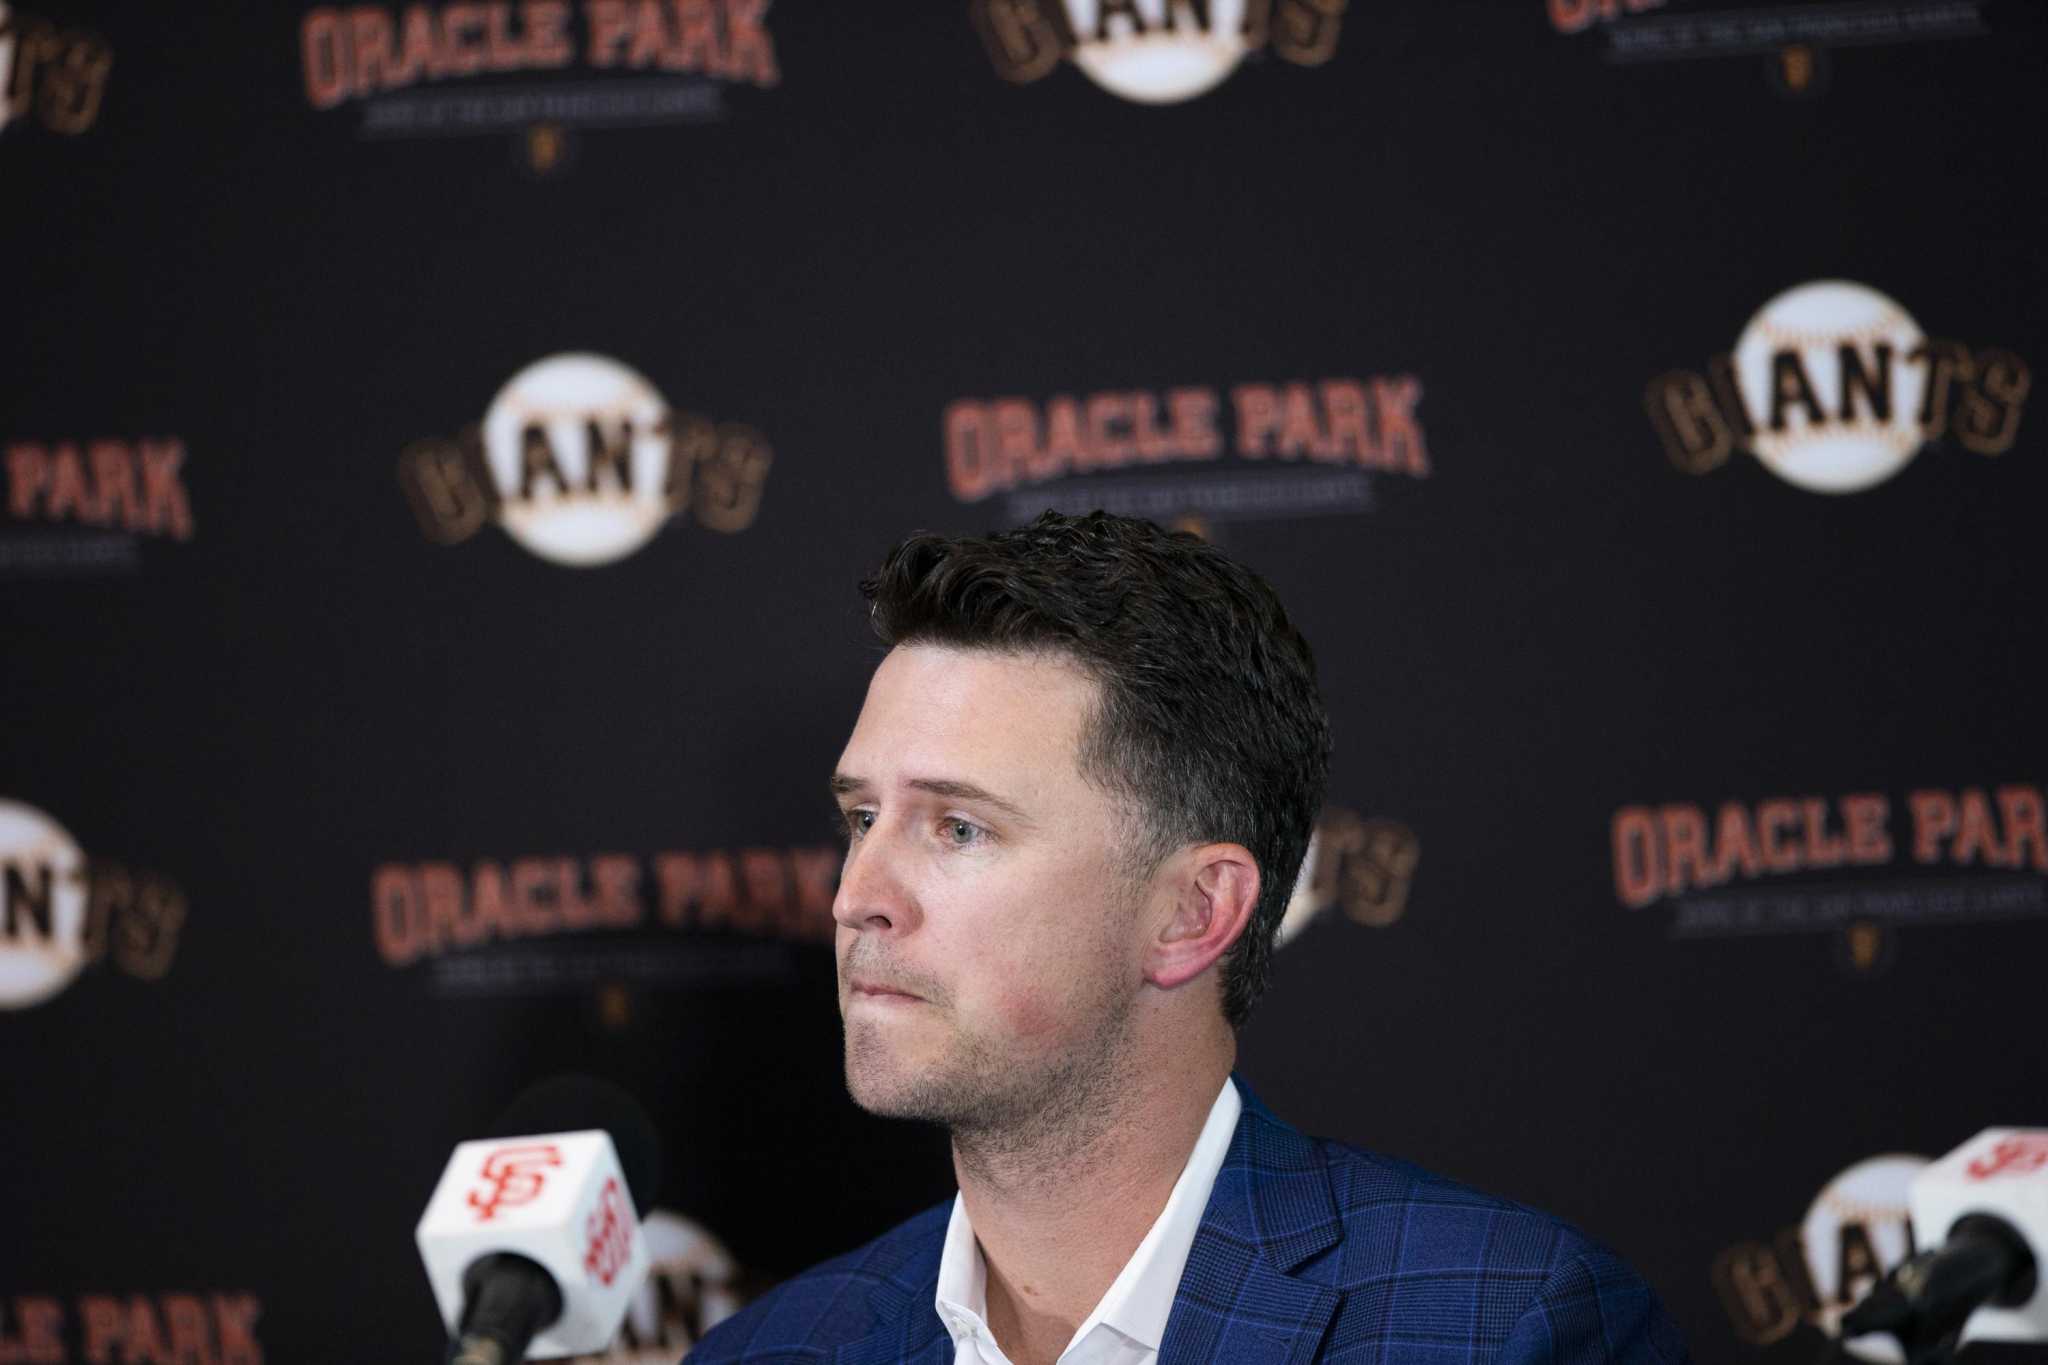 Giants great Buster Posey retires - The Japan Times